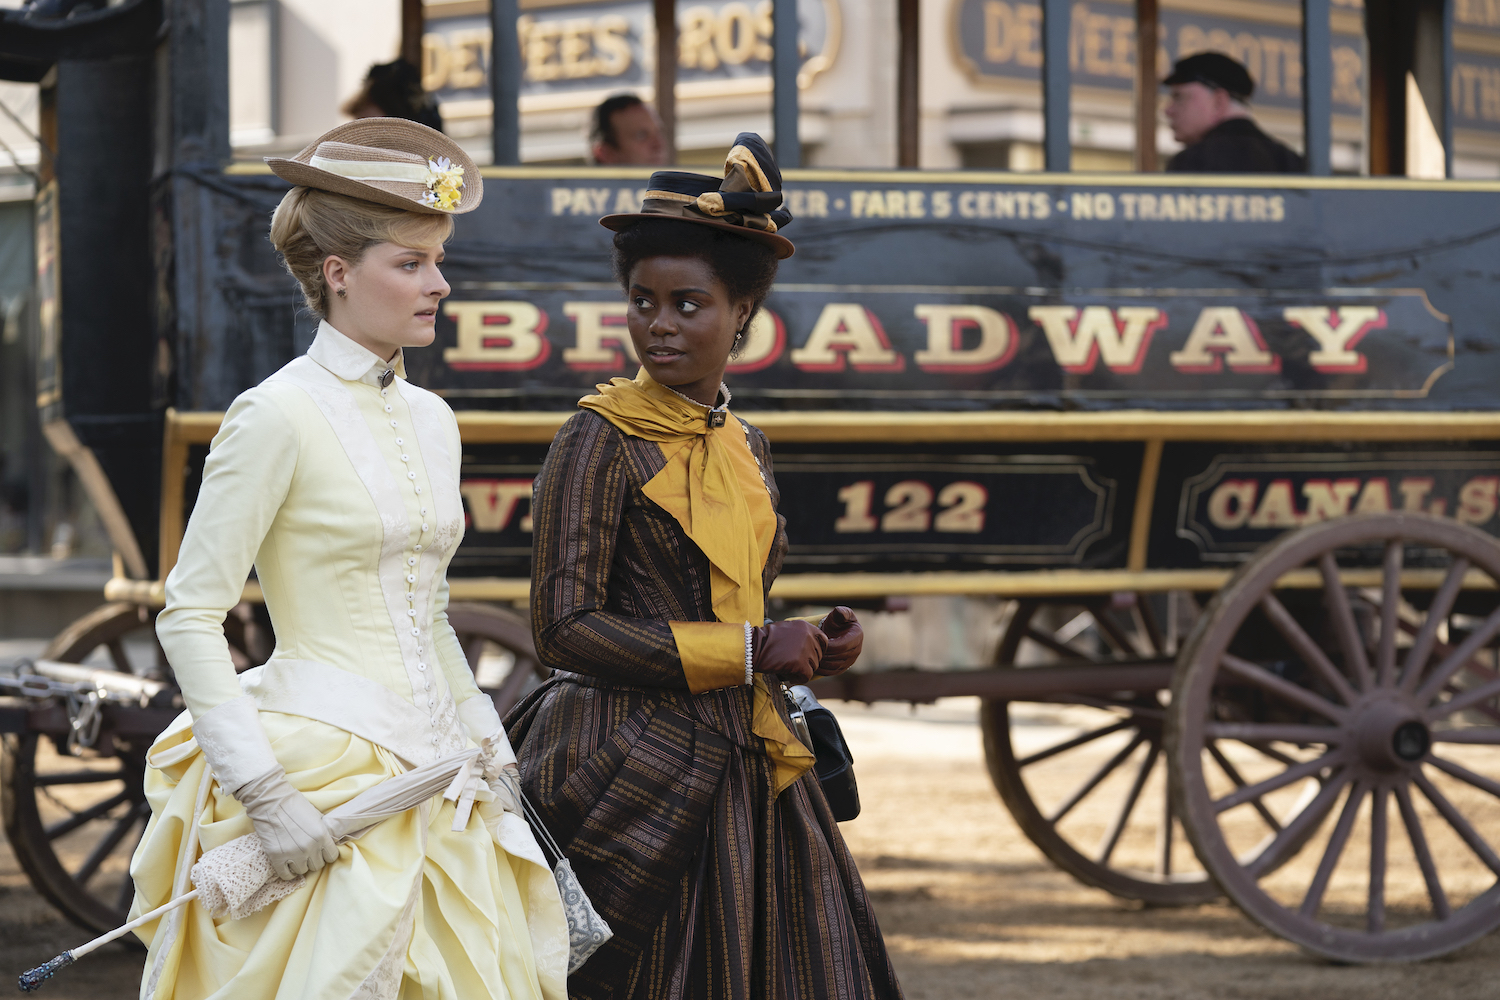 Louisa Jacobsen and Denee Benton, both wearing late 19th century dresses, in front of an omnibus